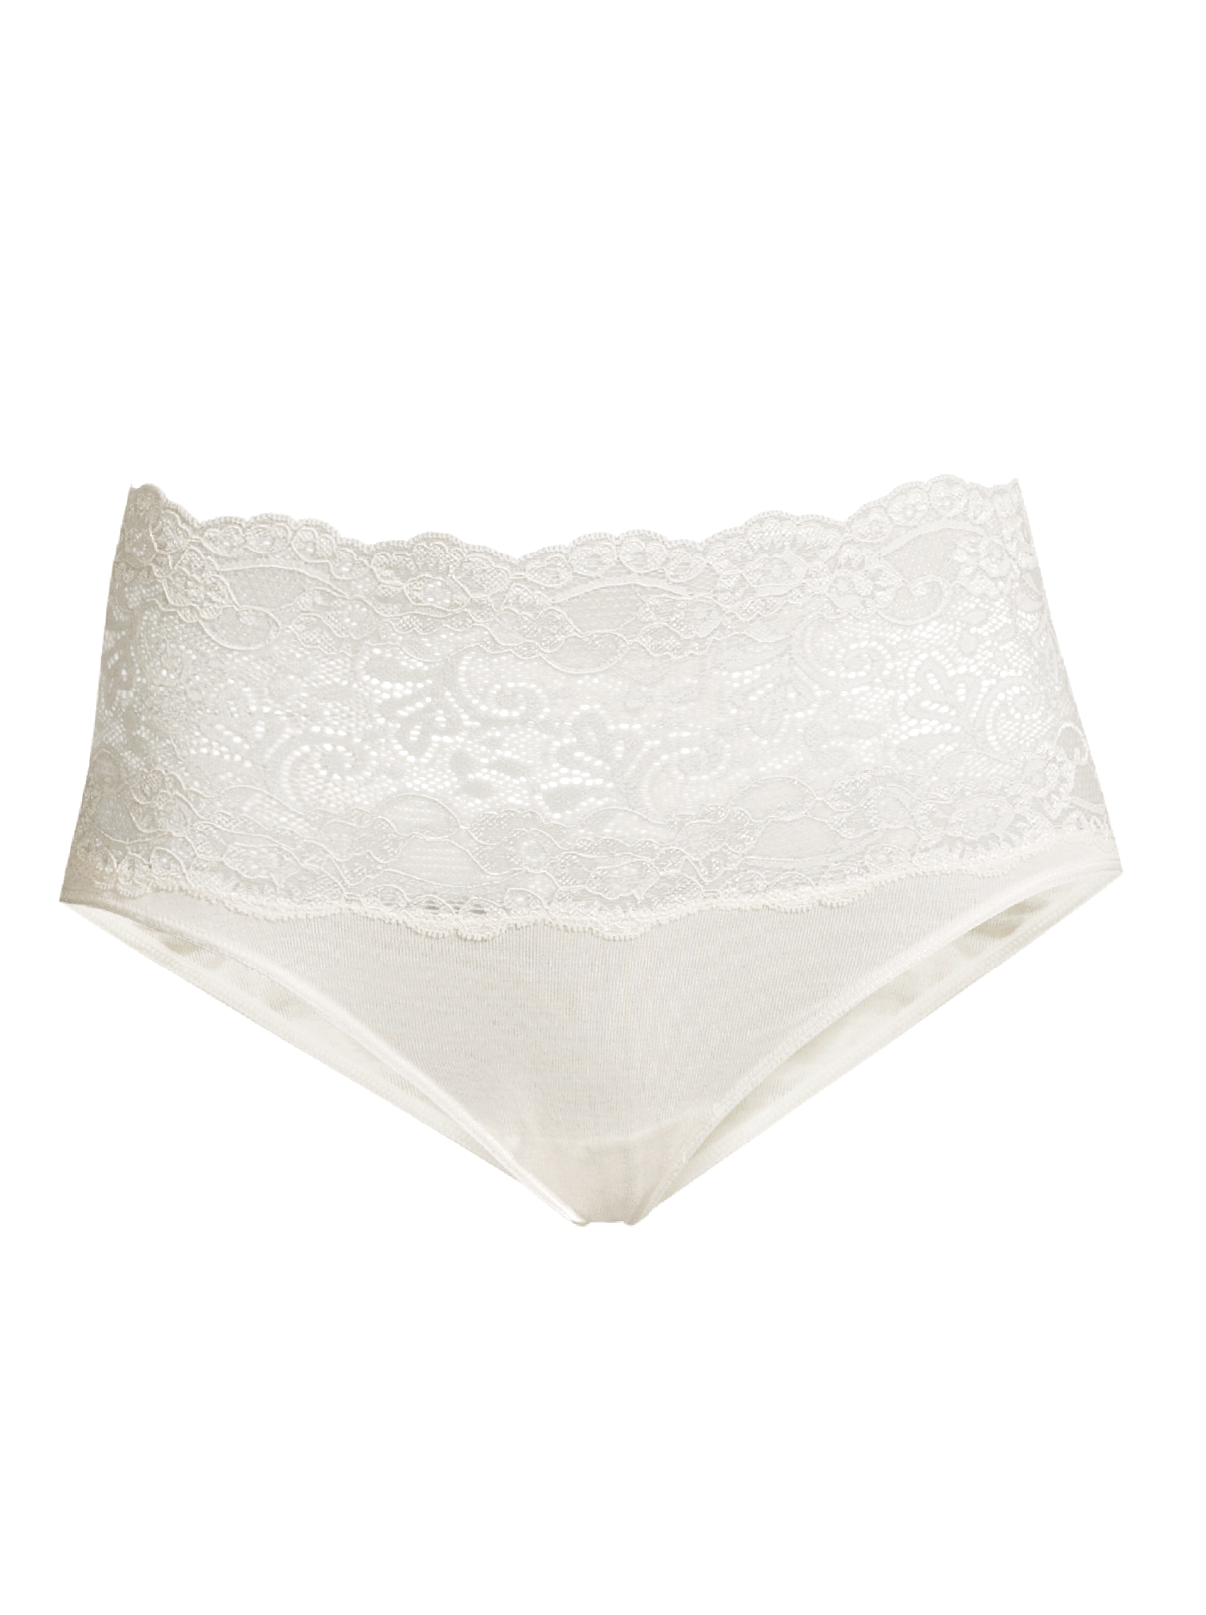 White briefs in cotton with leavers lace